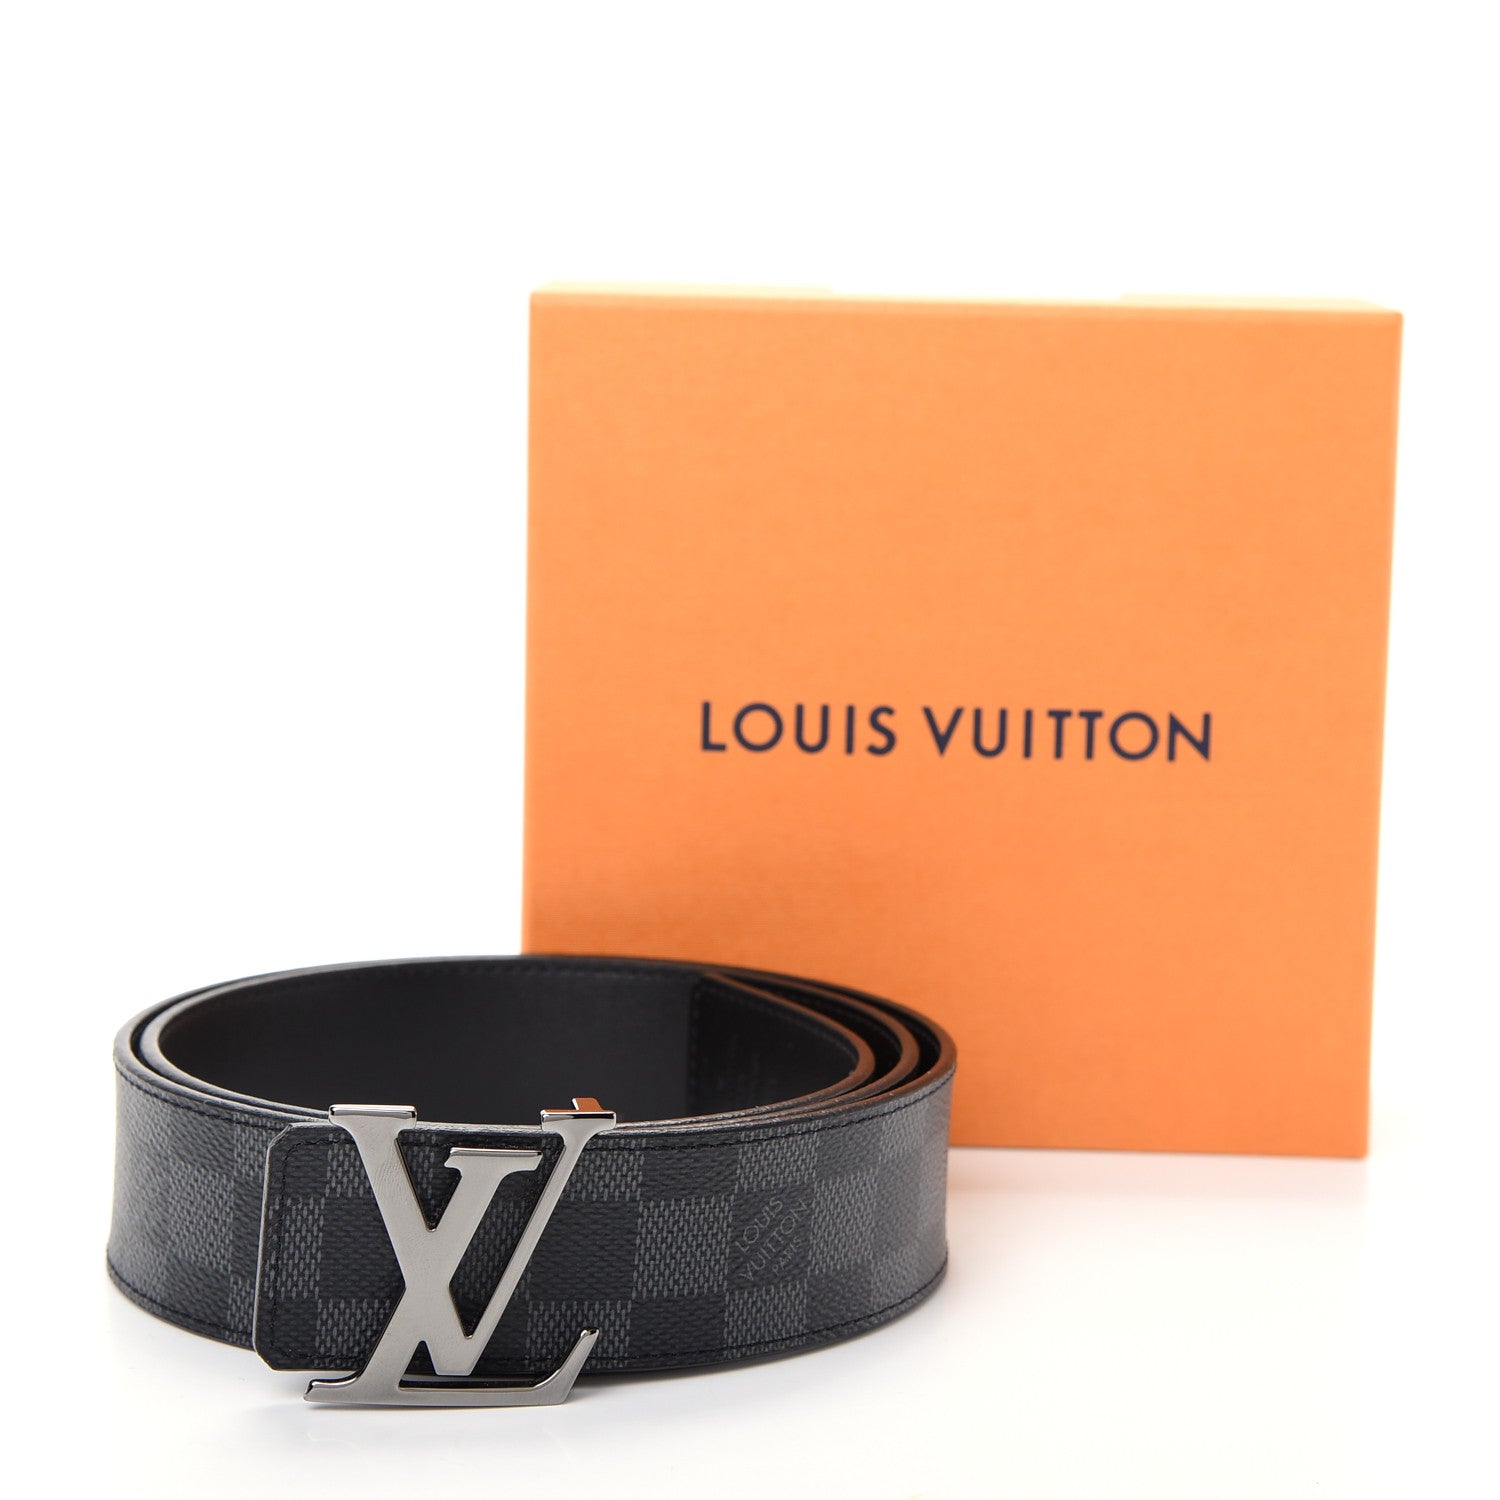 LV INITIALS DAMIER GRAPHITE BELT $490.00 This iconic and timeless belt with  a larger strap and buckle is perfect with j…